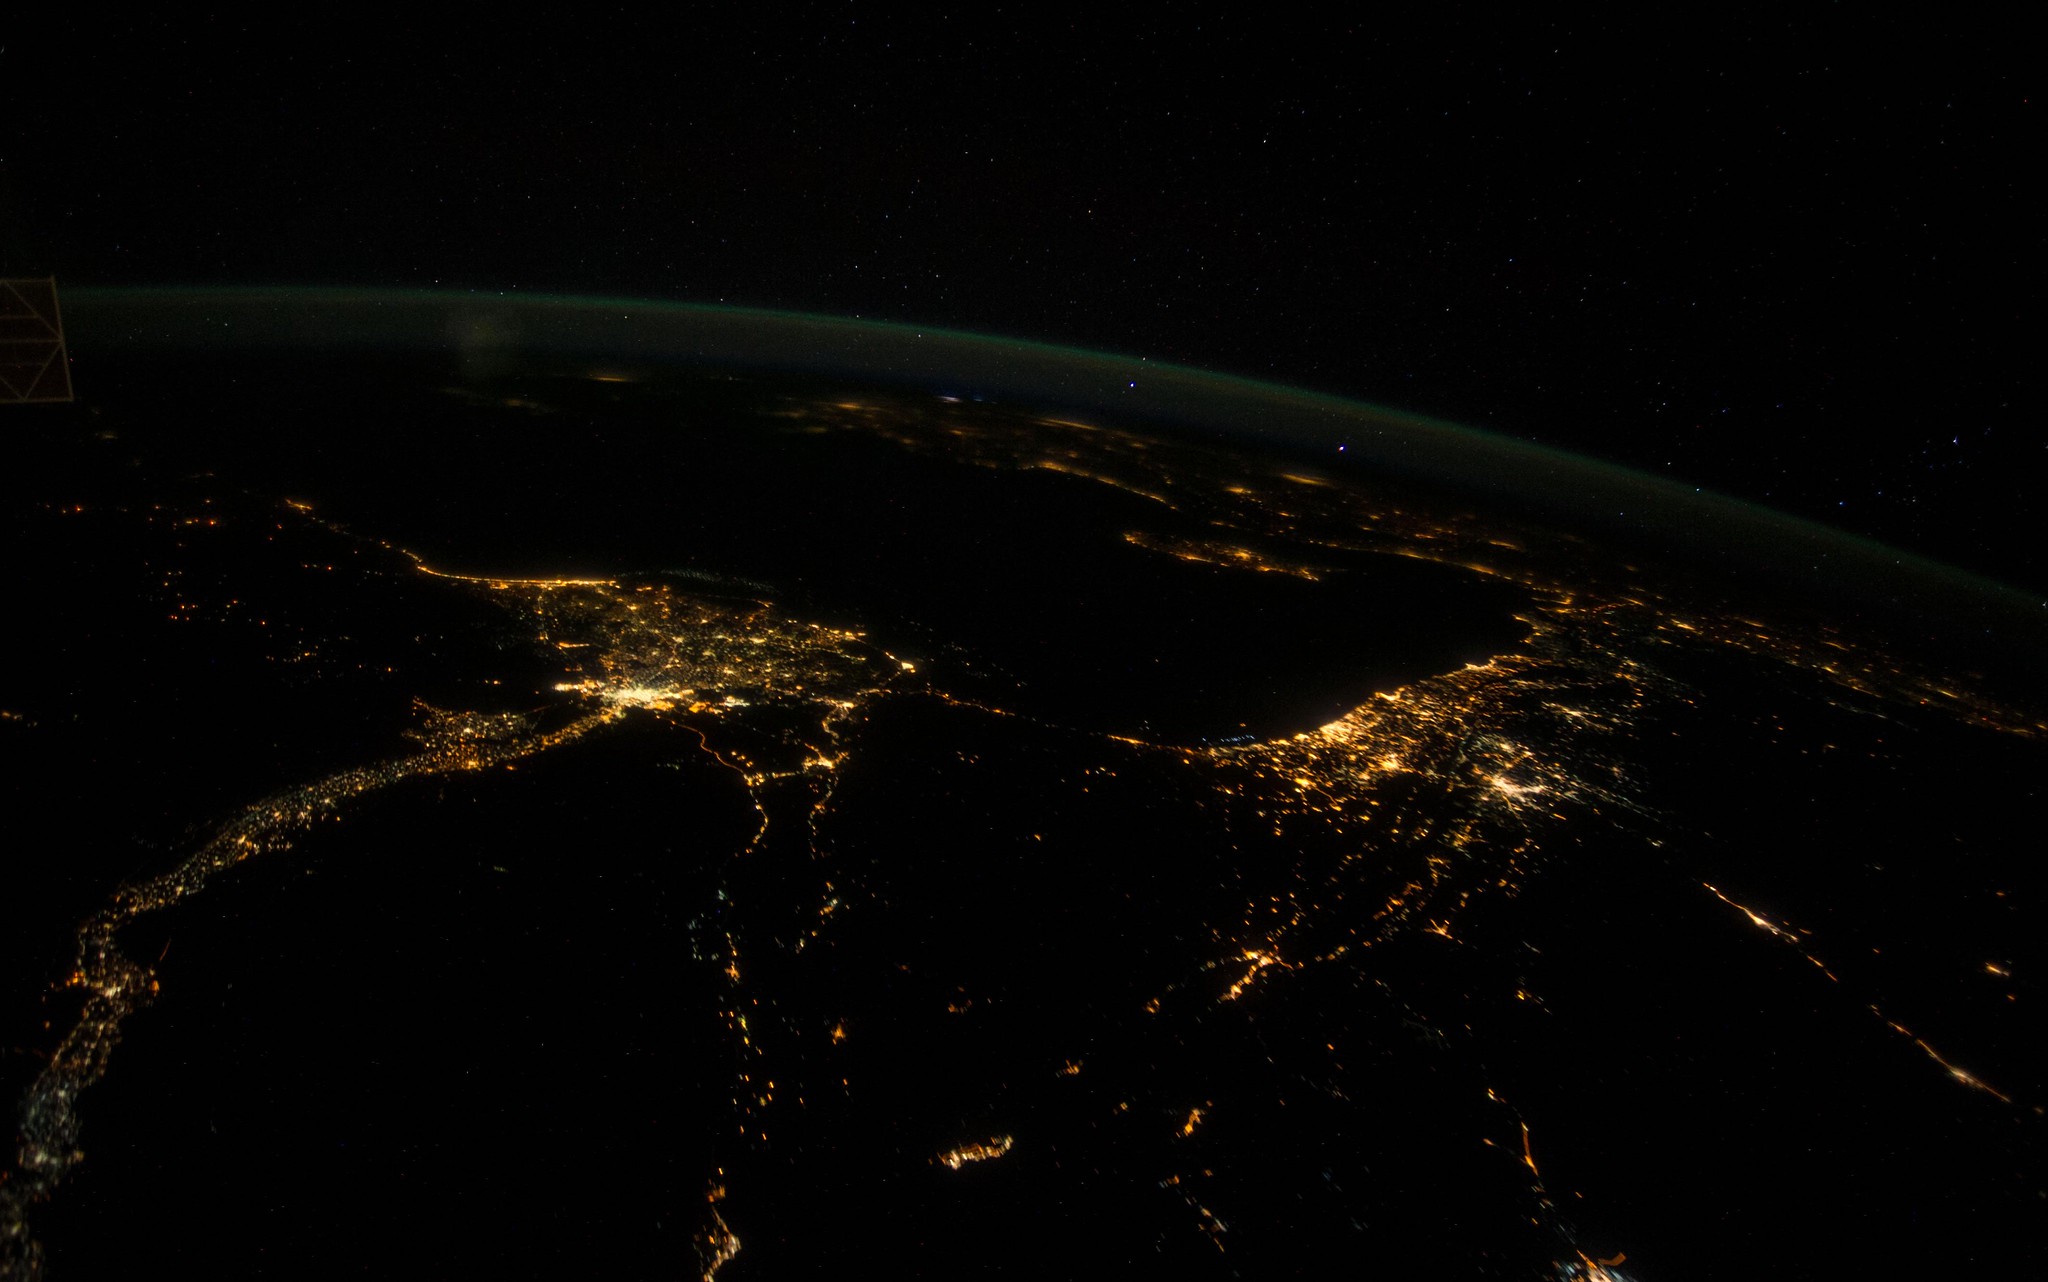 View of part of the Middle East at night from the International Space Station. Photo by Stuart Rankin, Flickr.